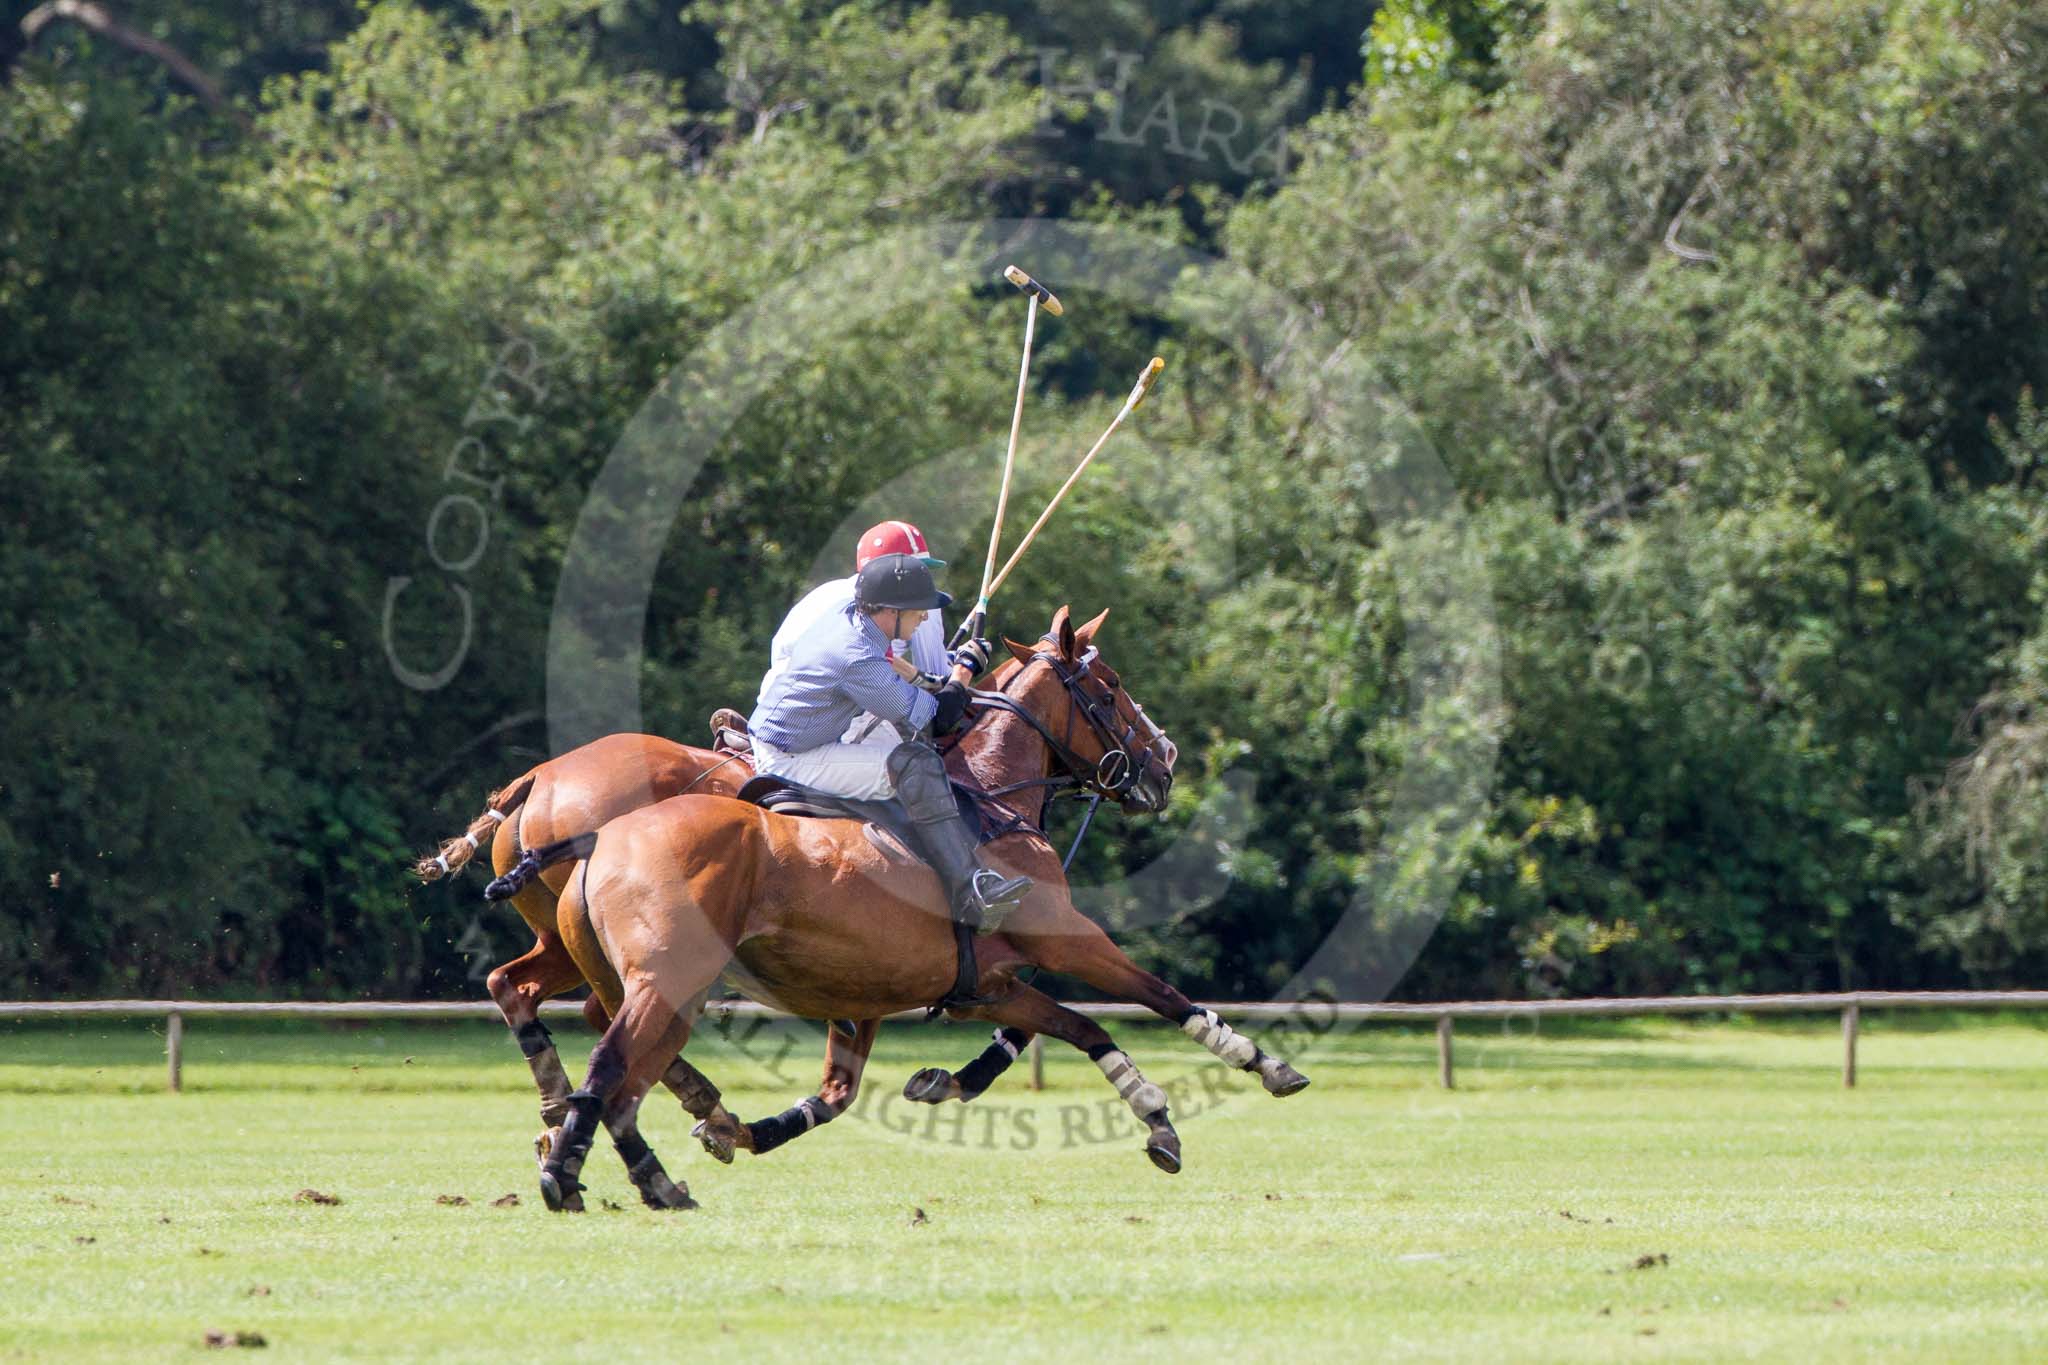 7th Heritage Polo Cup finals: John Martin hanging in there in a ride off from Sebastian Funes..
Hurtwood Park Polo Club,
Ewhurst Green,
Surrey,
United Kingdom,
on 05 August 2012 at 14:10, image #67